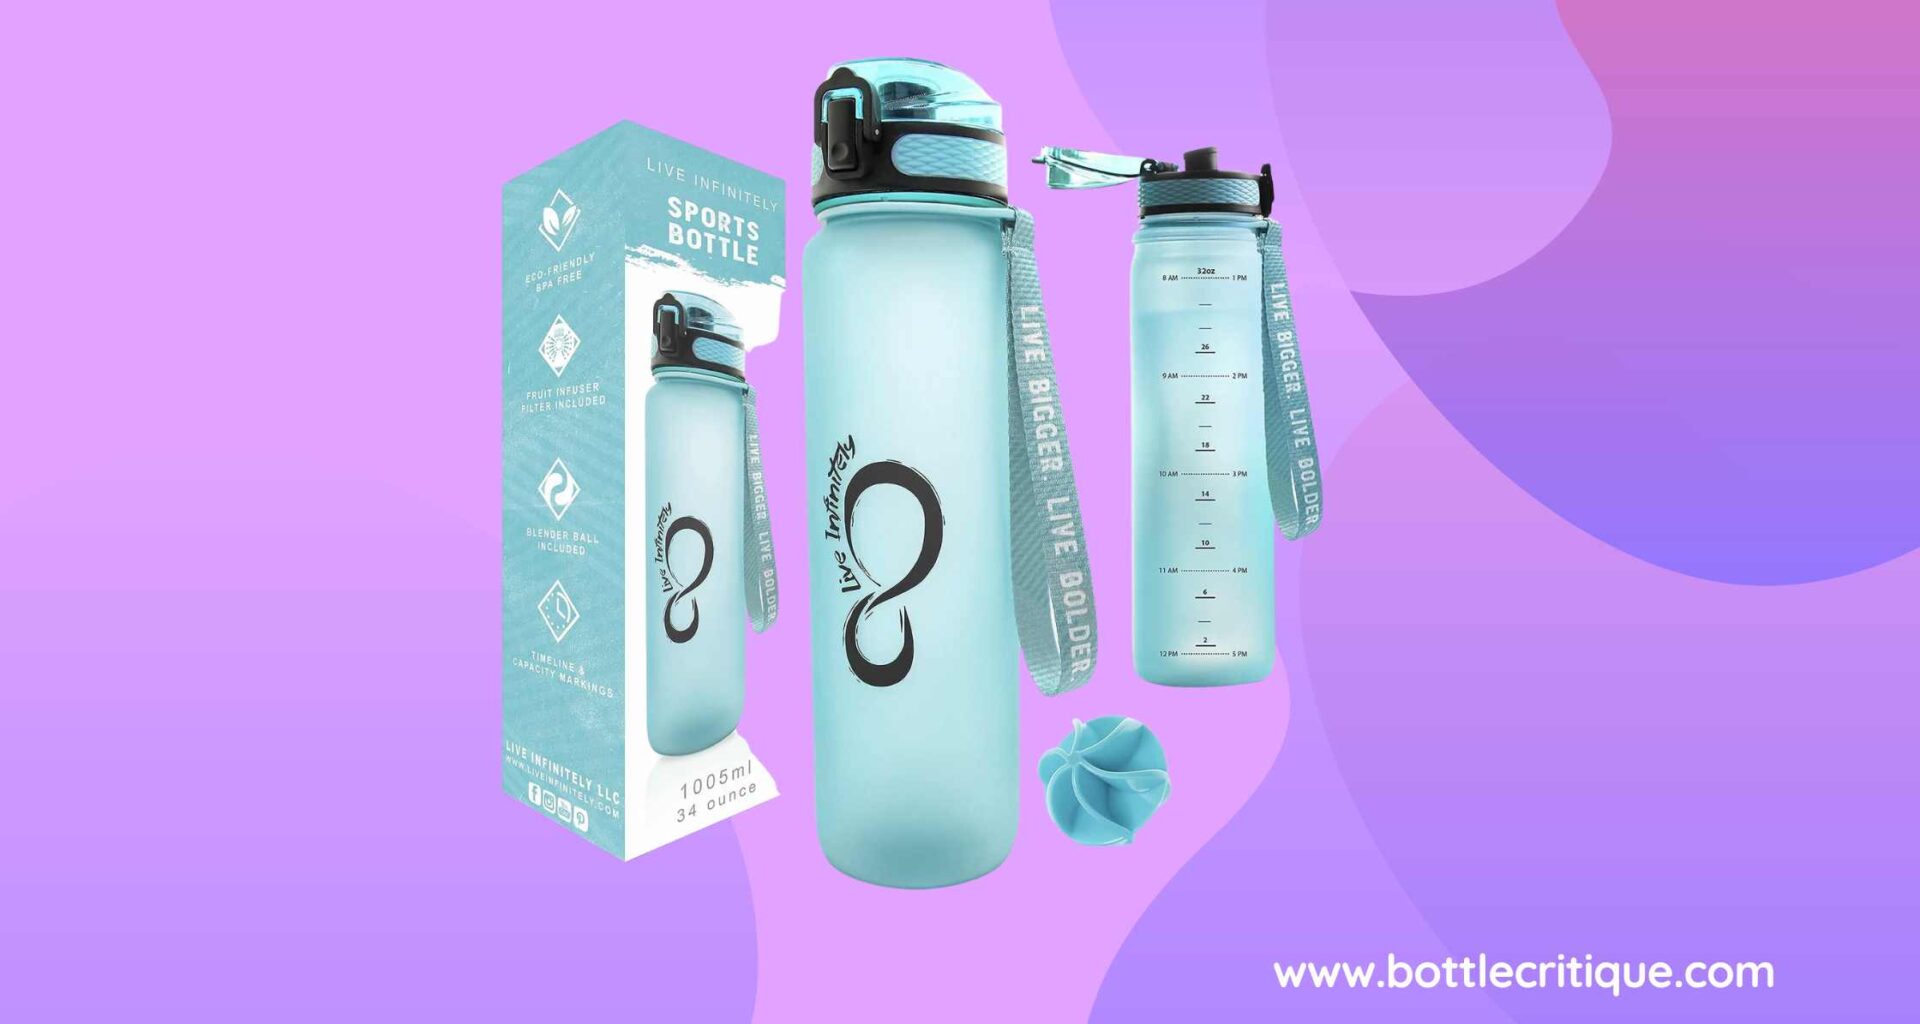 Live Infinitely Water Bottle How to Remove Strap?